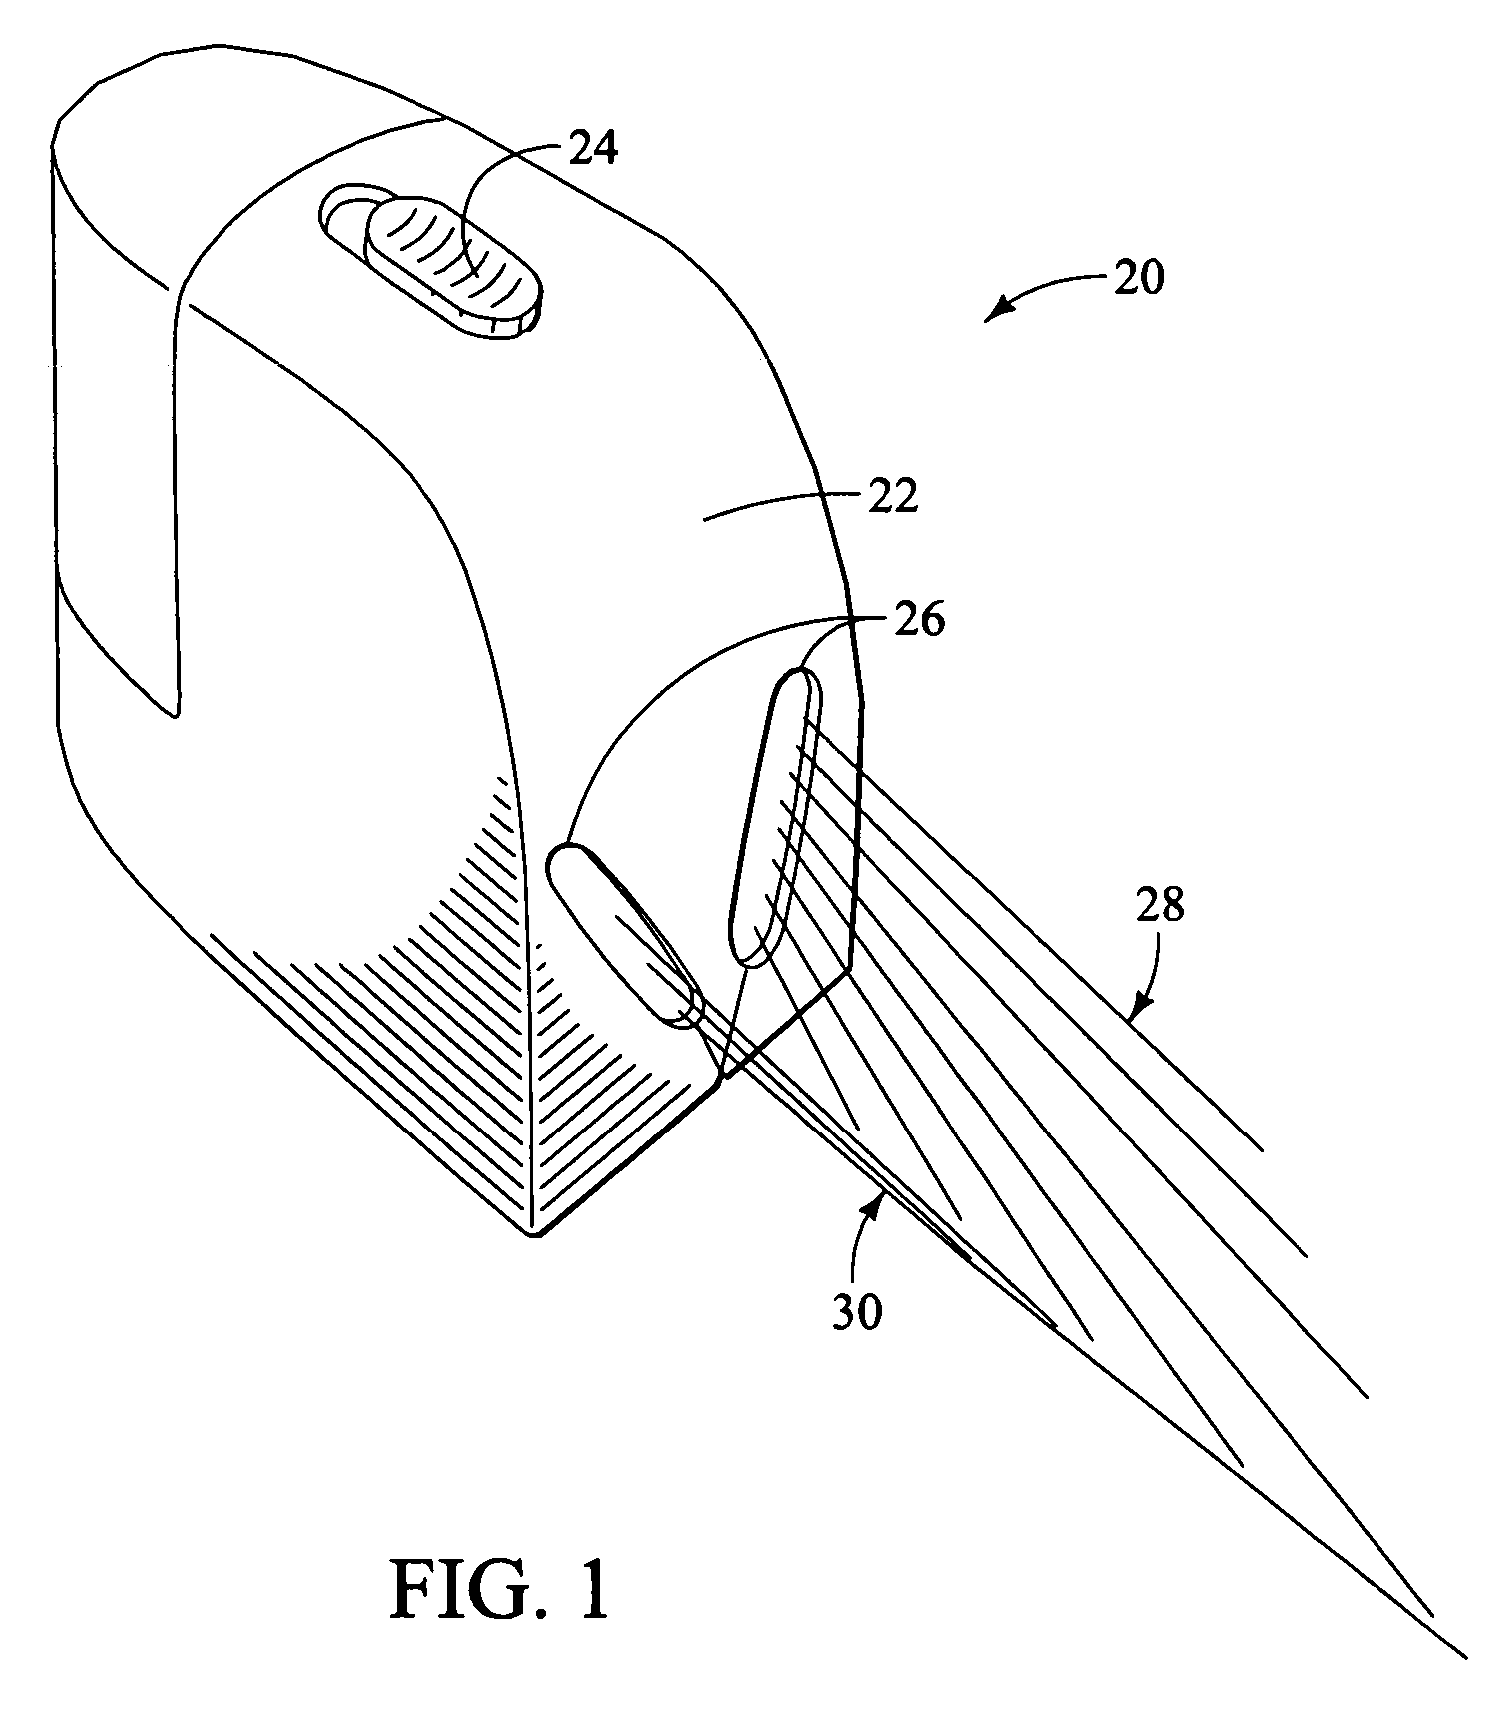 Method and apparatus for determining reference levels and flatness of a surface